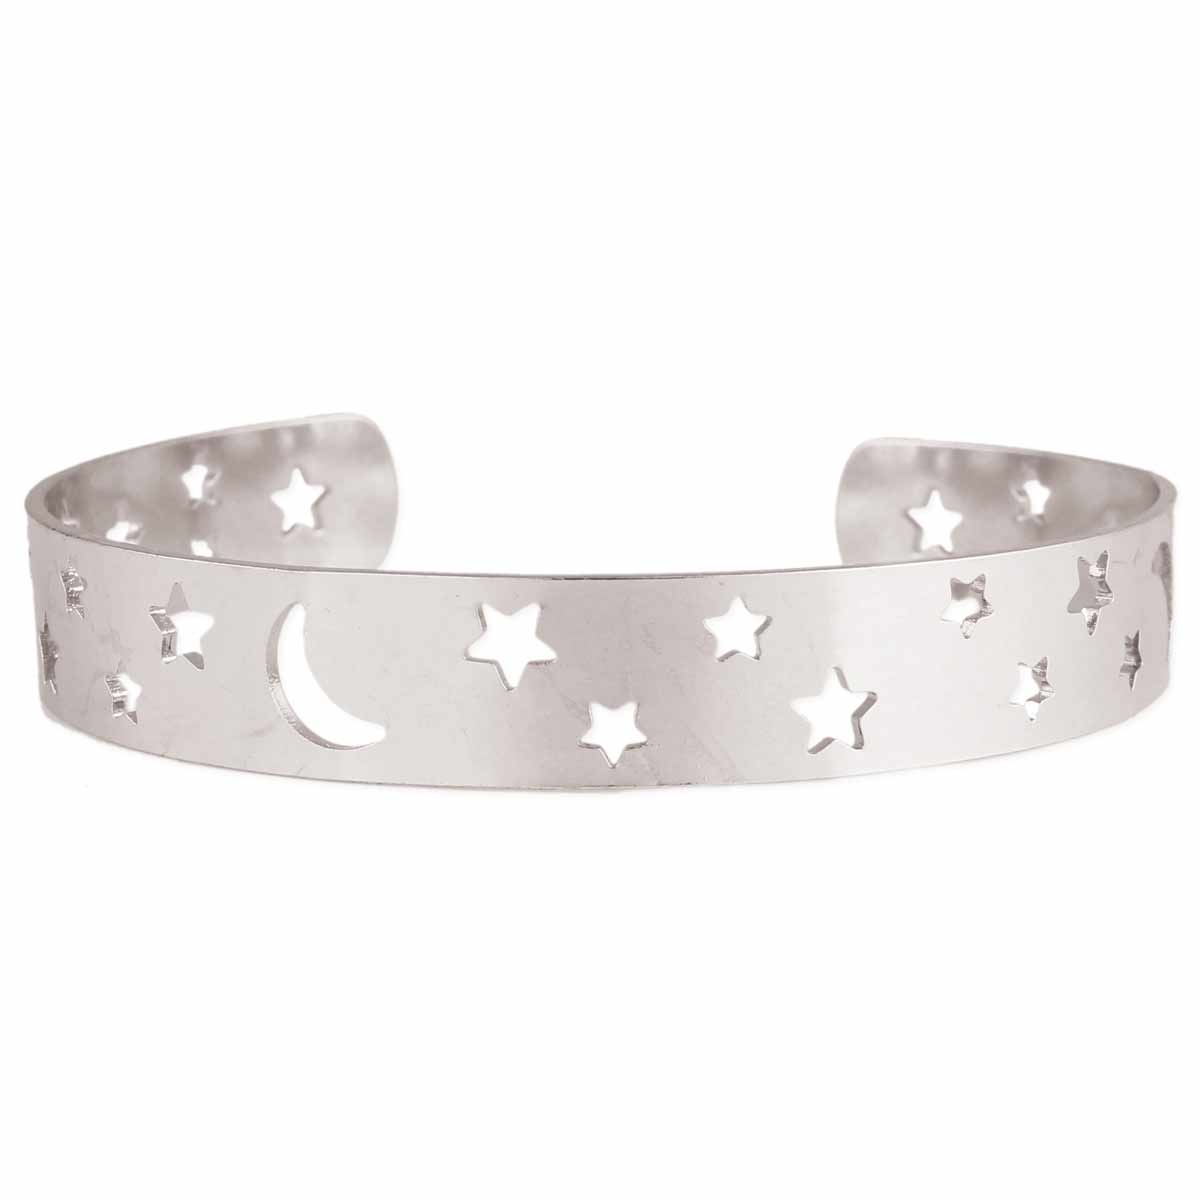 Heavens Above Moon And Stars Cuff Bracelet (Gold or Silver)